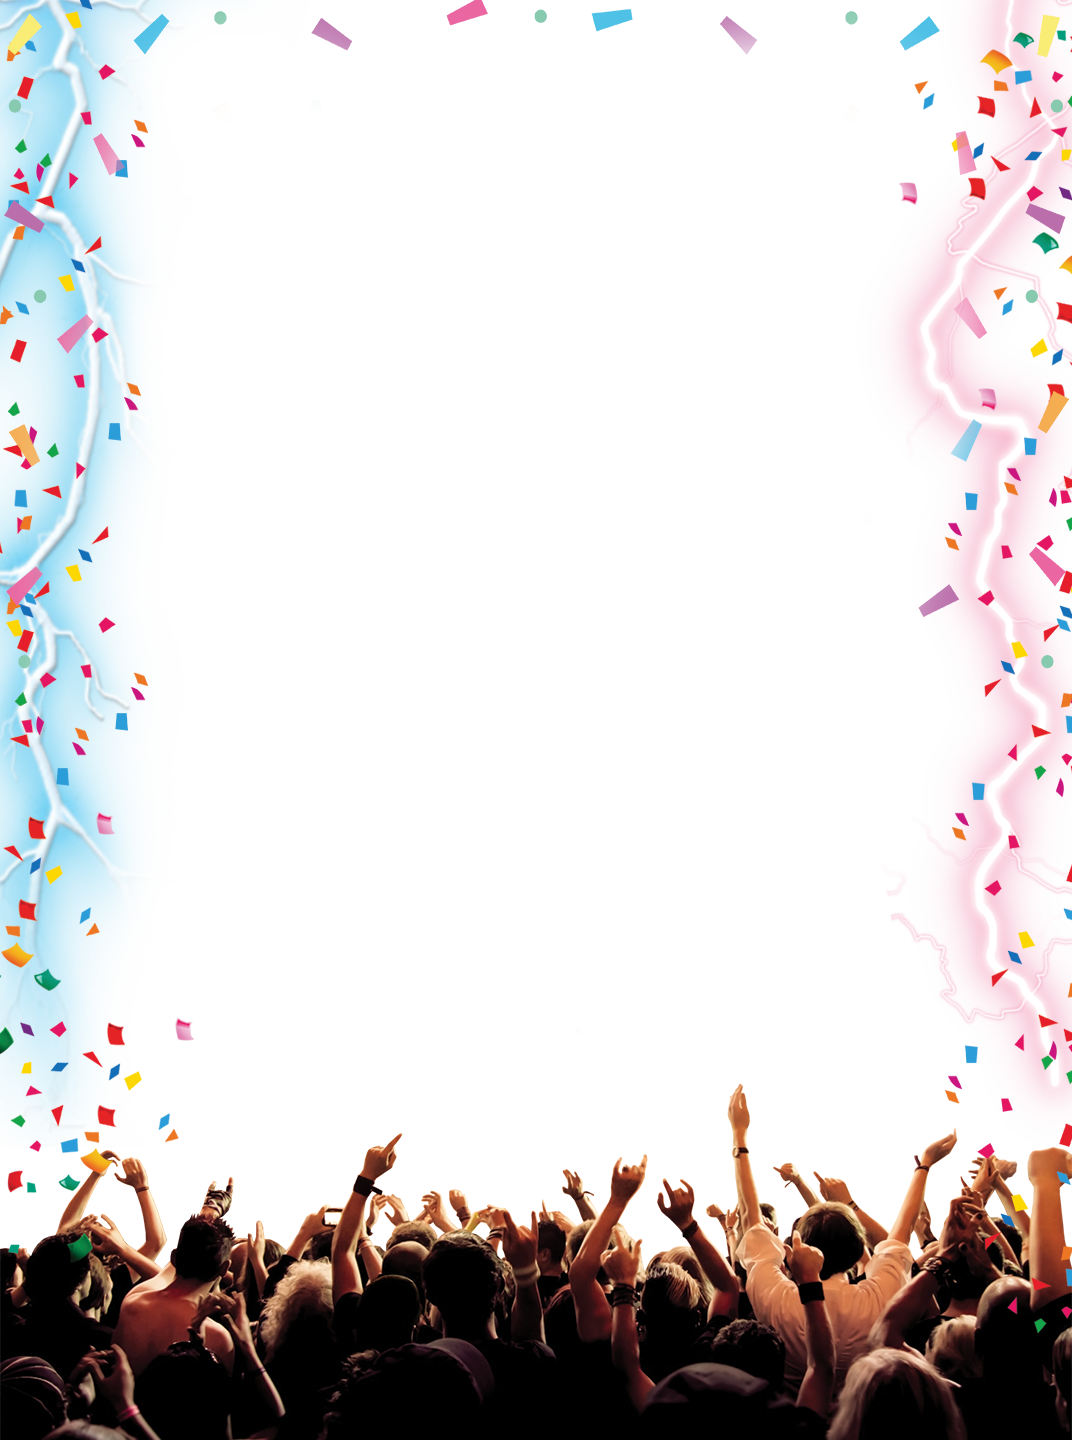 Crowd overlay png